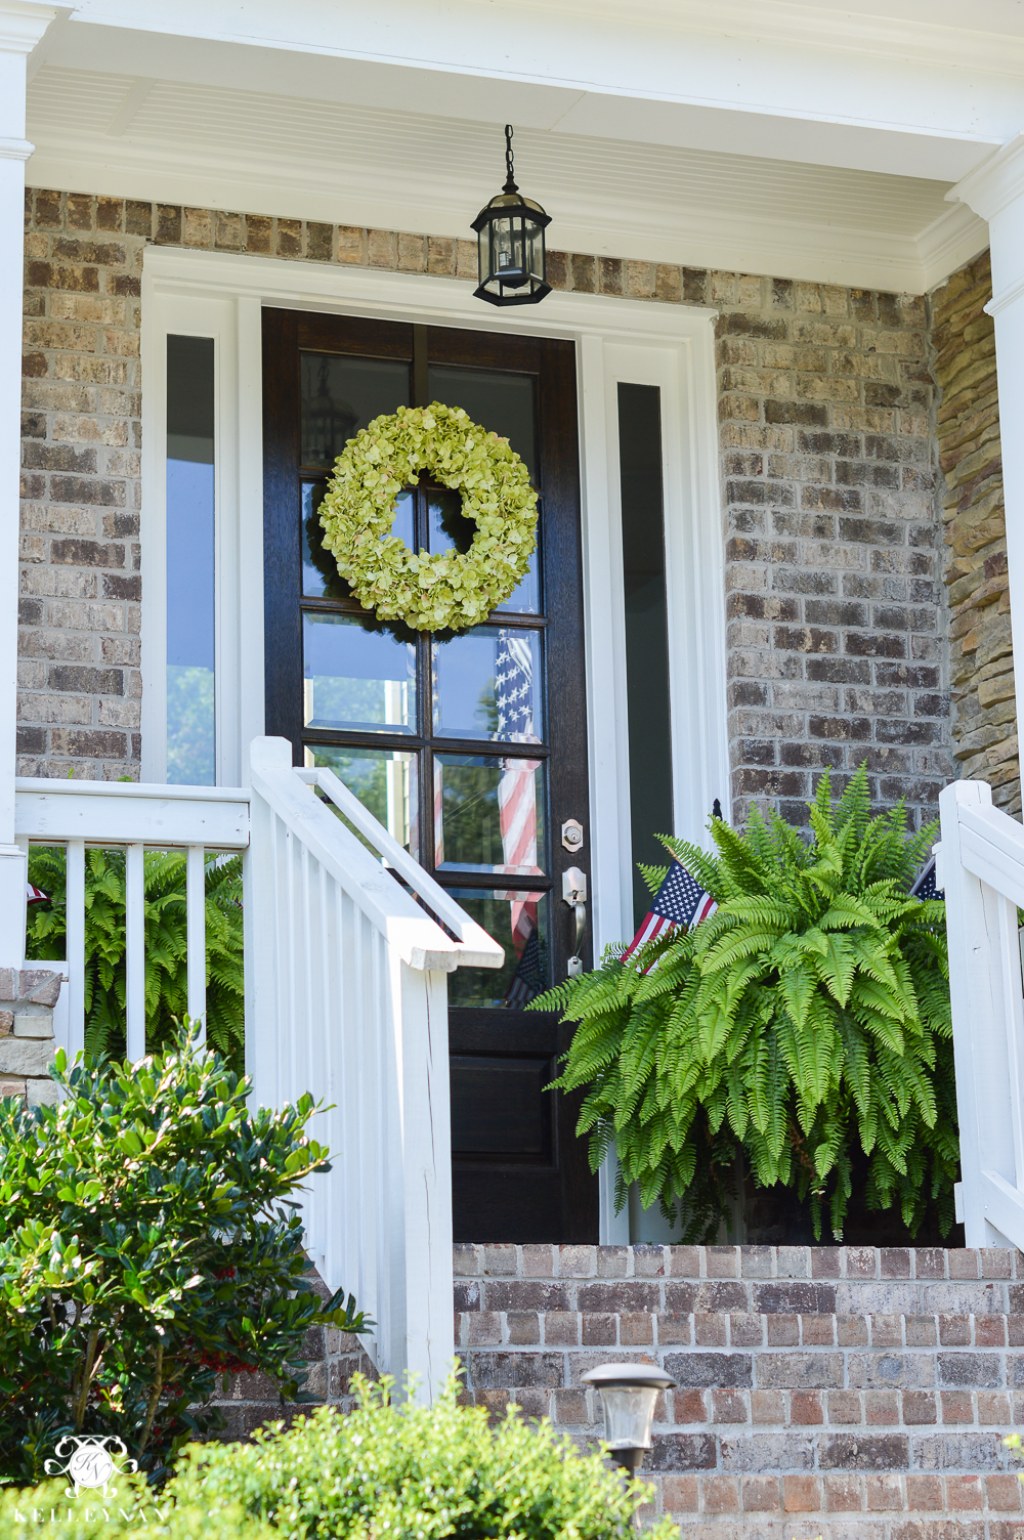 Picture of: Front Porch Throughout the Seasons and Why Ferns in Urns are the